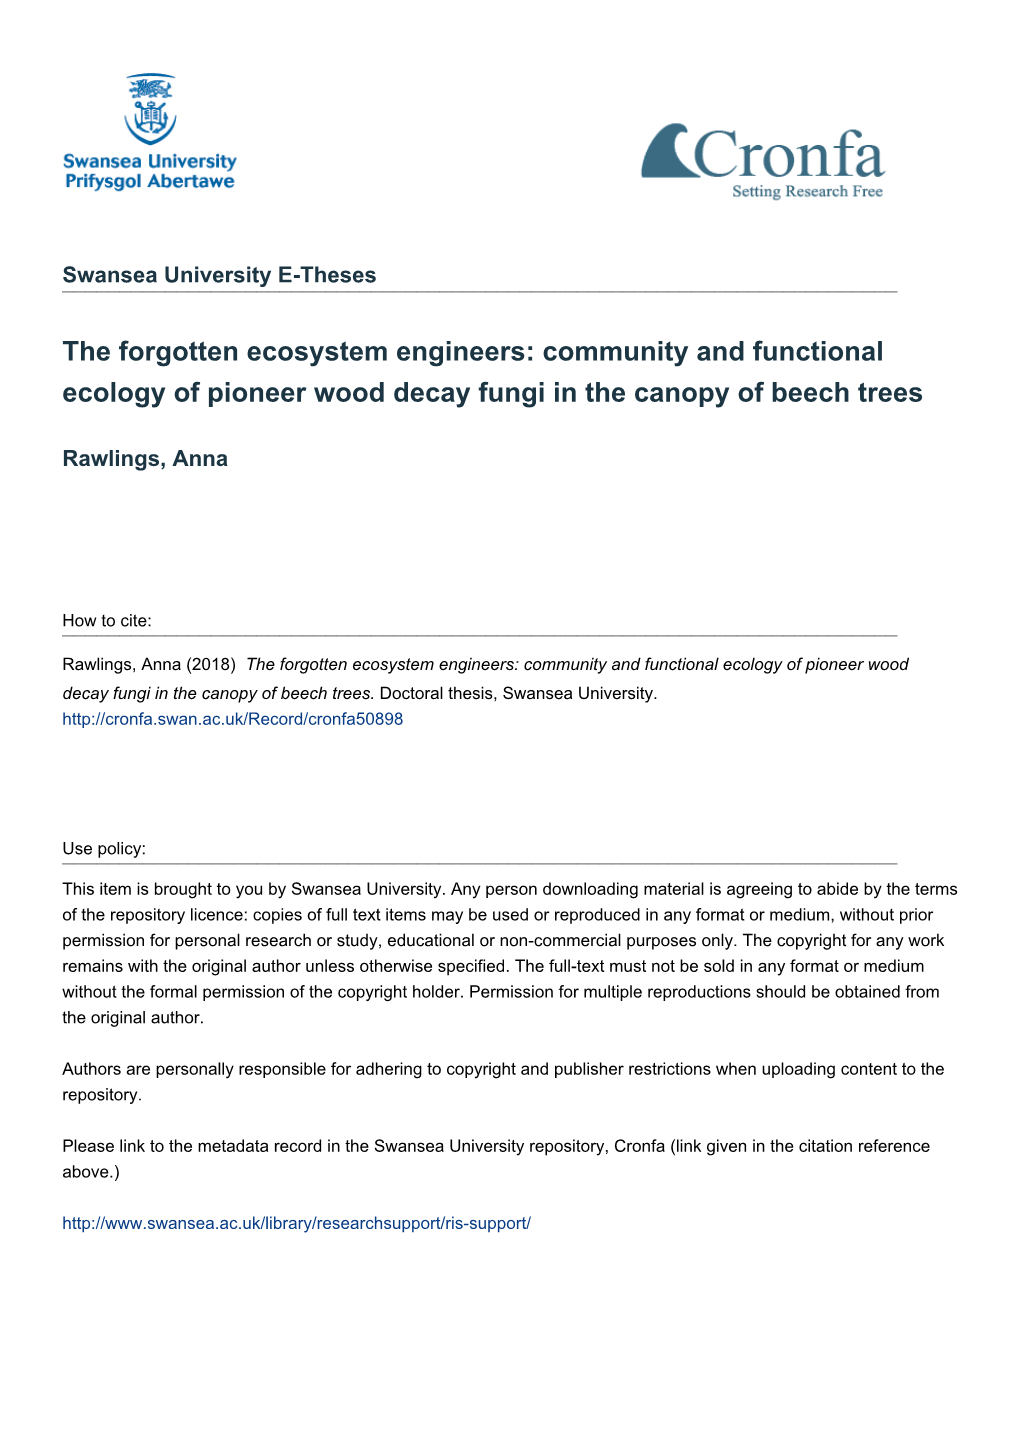 Community and Functional Ecology of Pioneer Wood Decay Fungi in the Canopy of Beech Trees